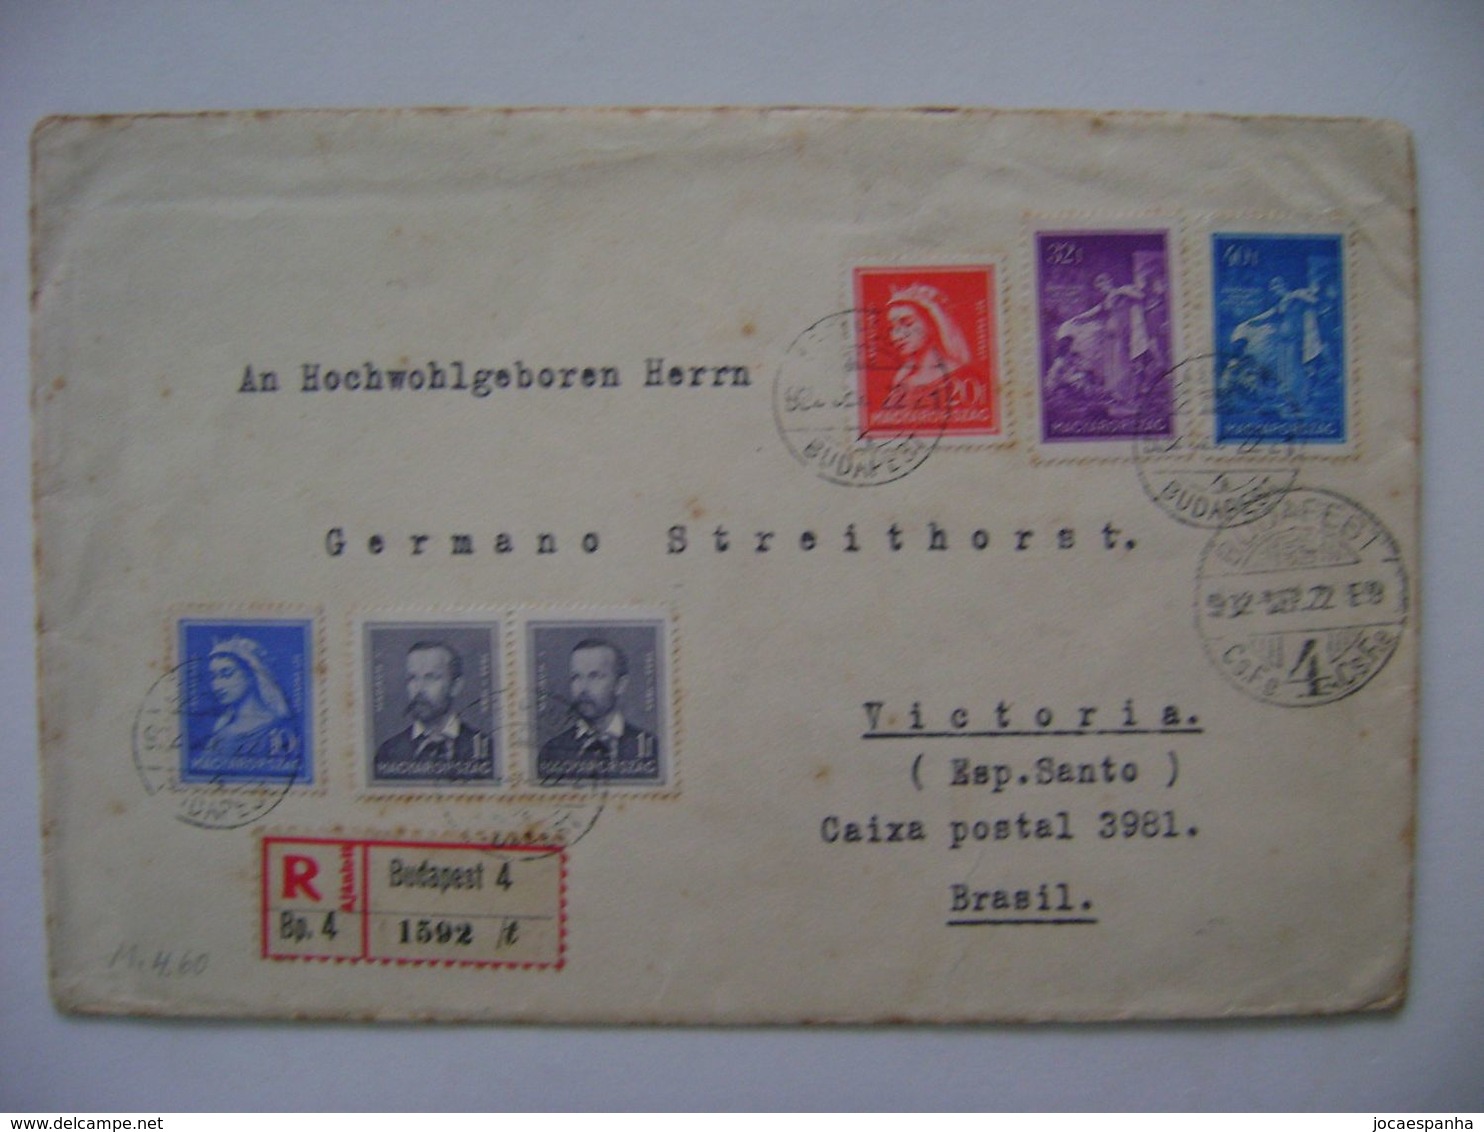 HUNGARY - LETTER SENT FROM BUDAPEST TO VICTORIA (BRAZIL) IN 1932 IN THE STATE - Briefe U. Dokumente